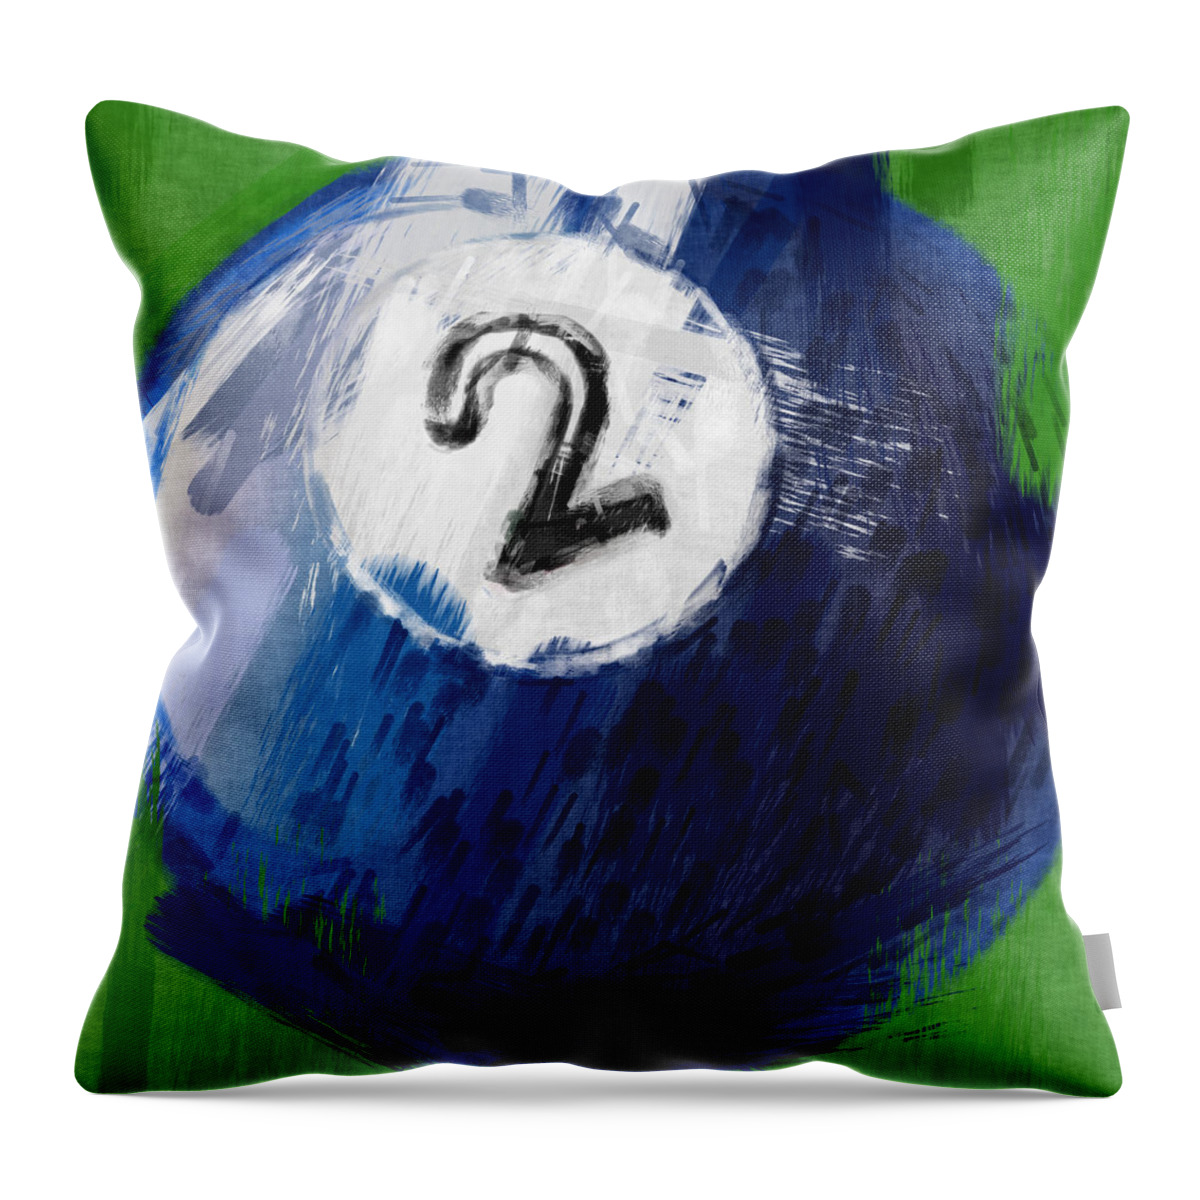 Two Throw Pillow featuring the photograph Number Two Billiards Ball Abstract by David G Paul